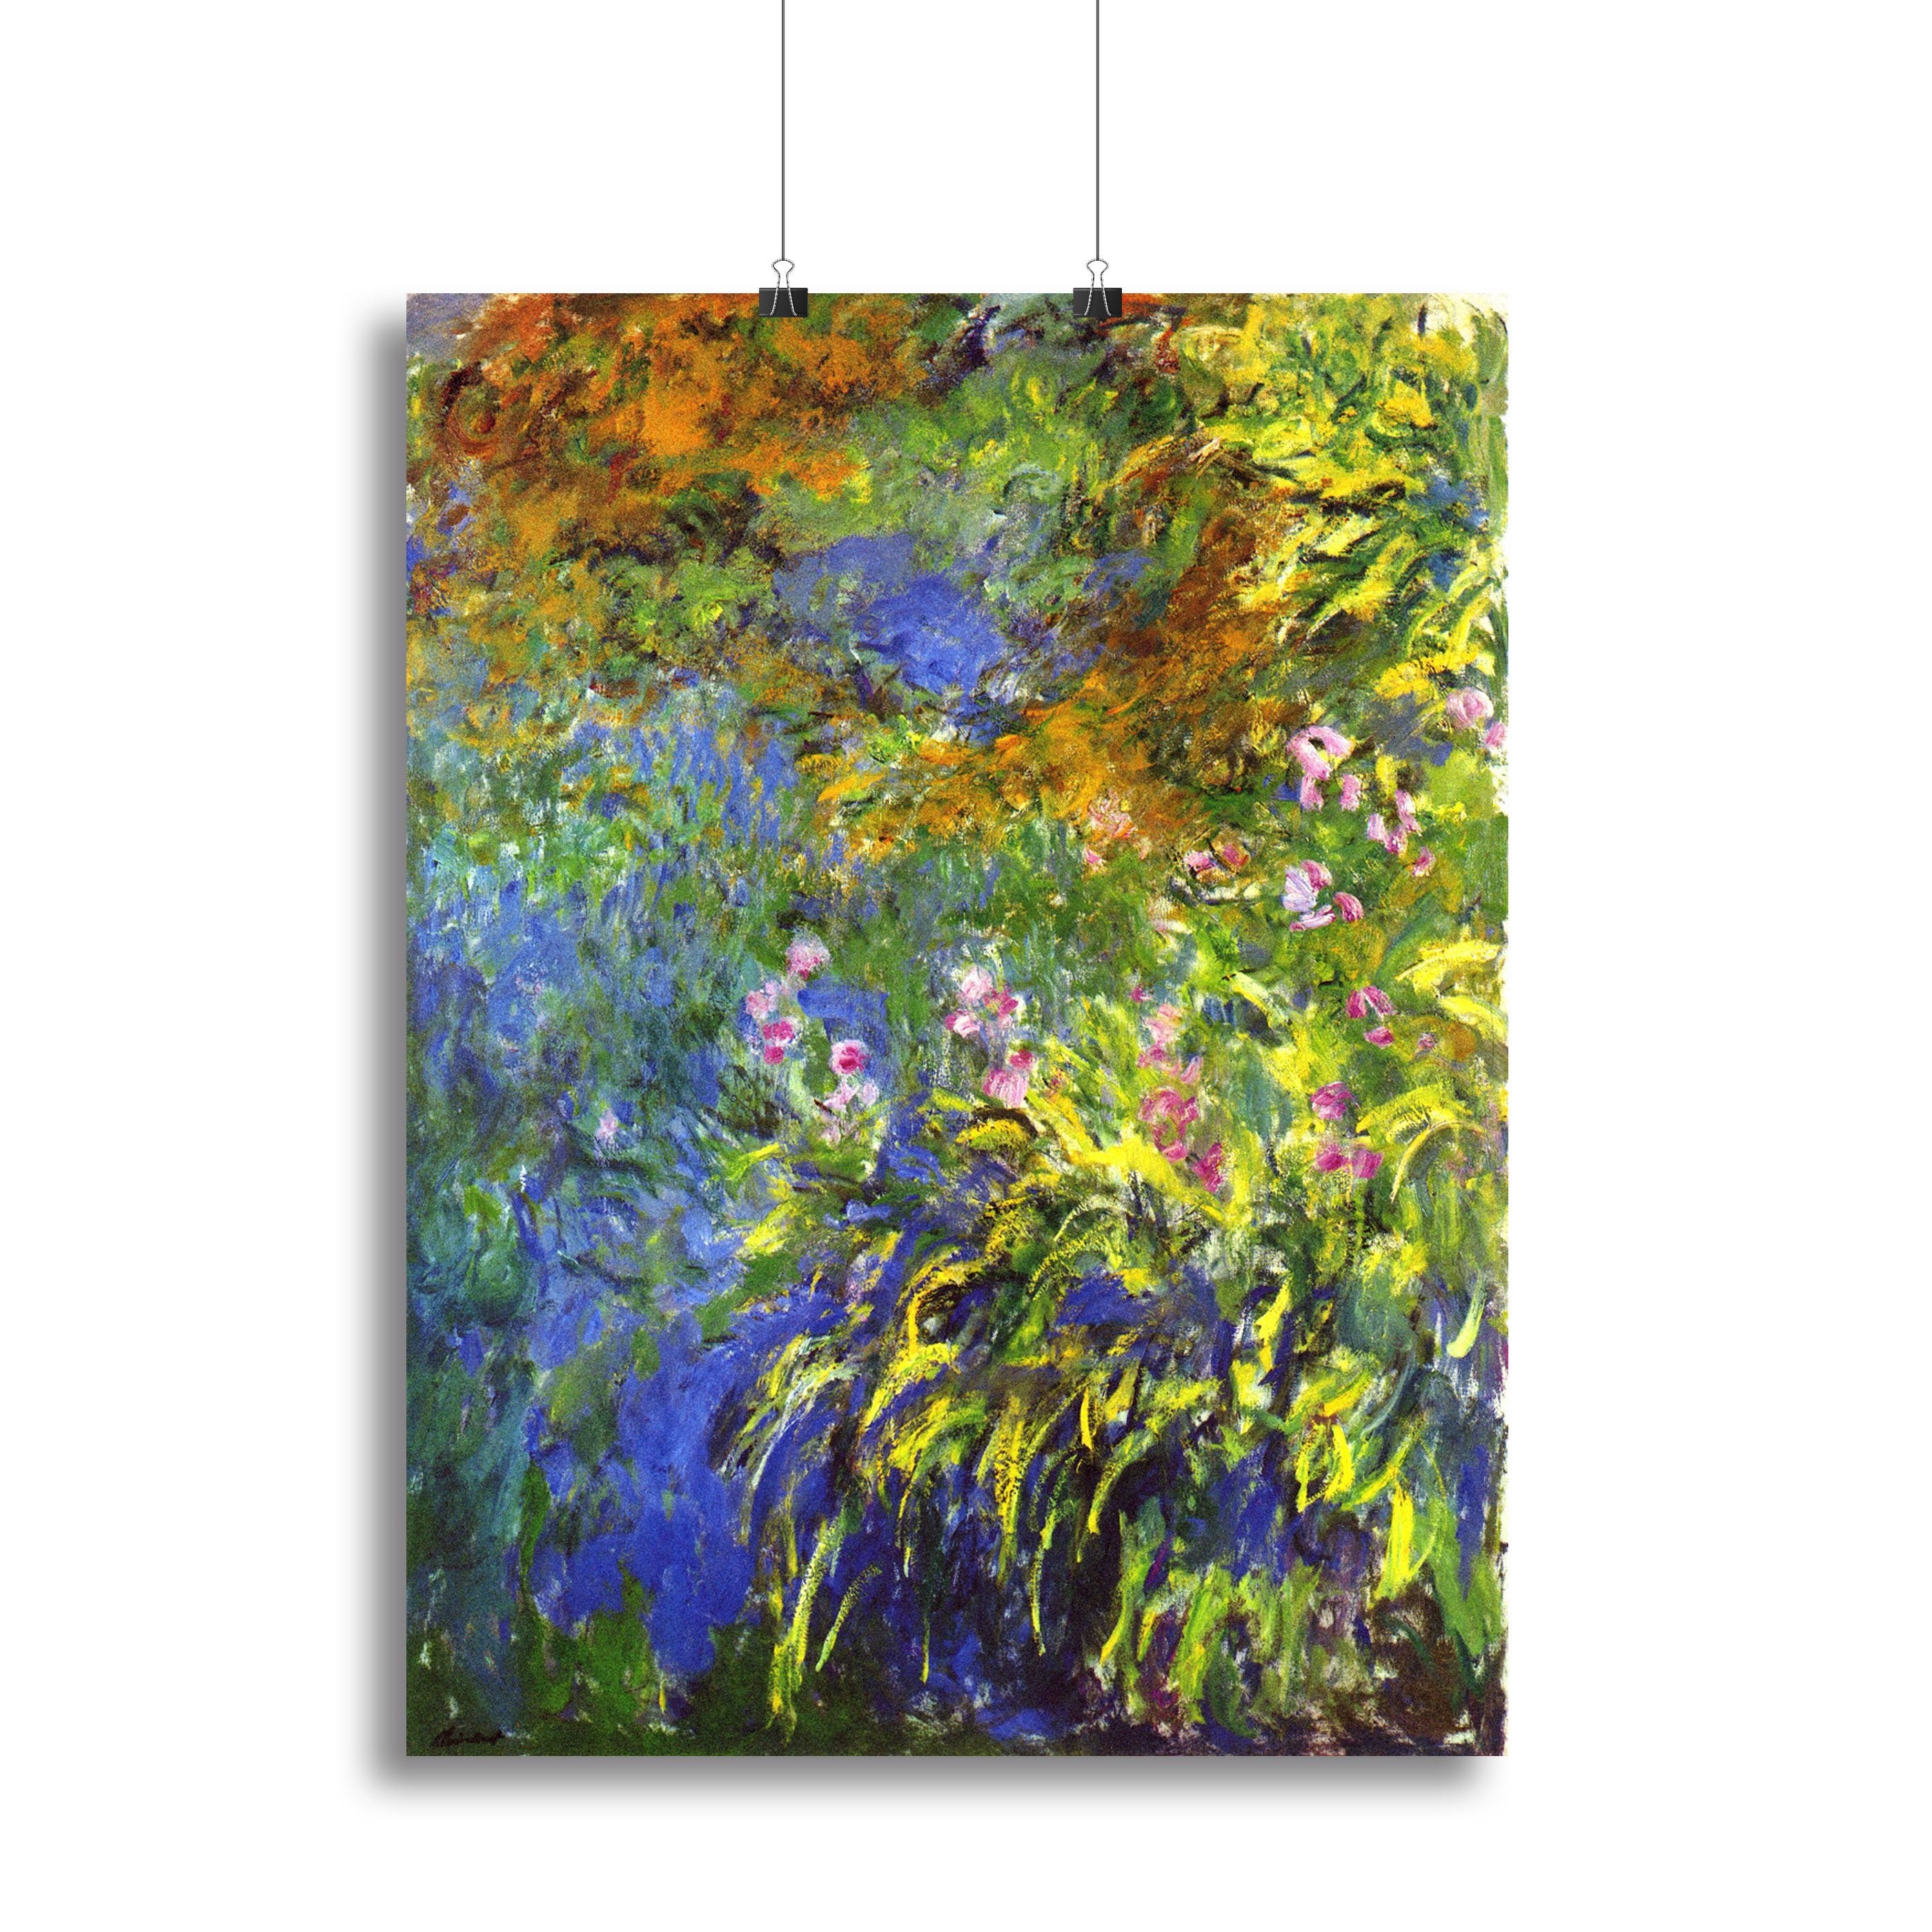 Iris at the sea rose pond 2 by Monet Canvas Print or Poster